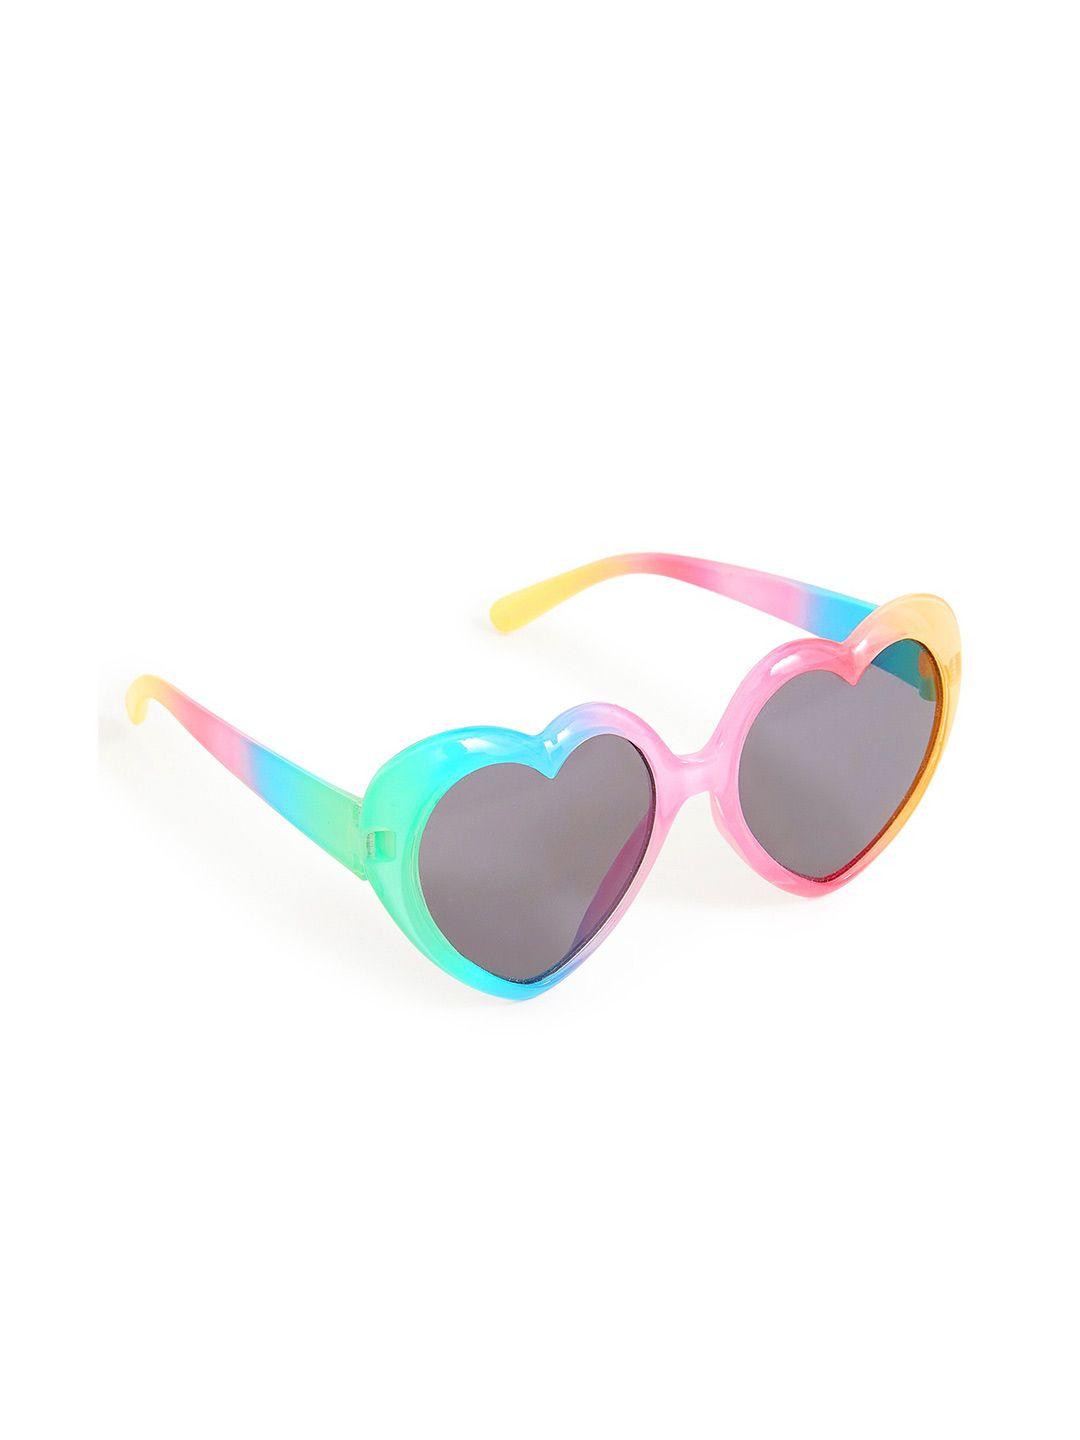 accessorize girls other sunglasses with uv protected lens ma-58312399001